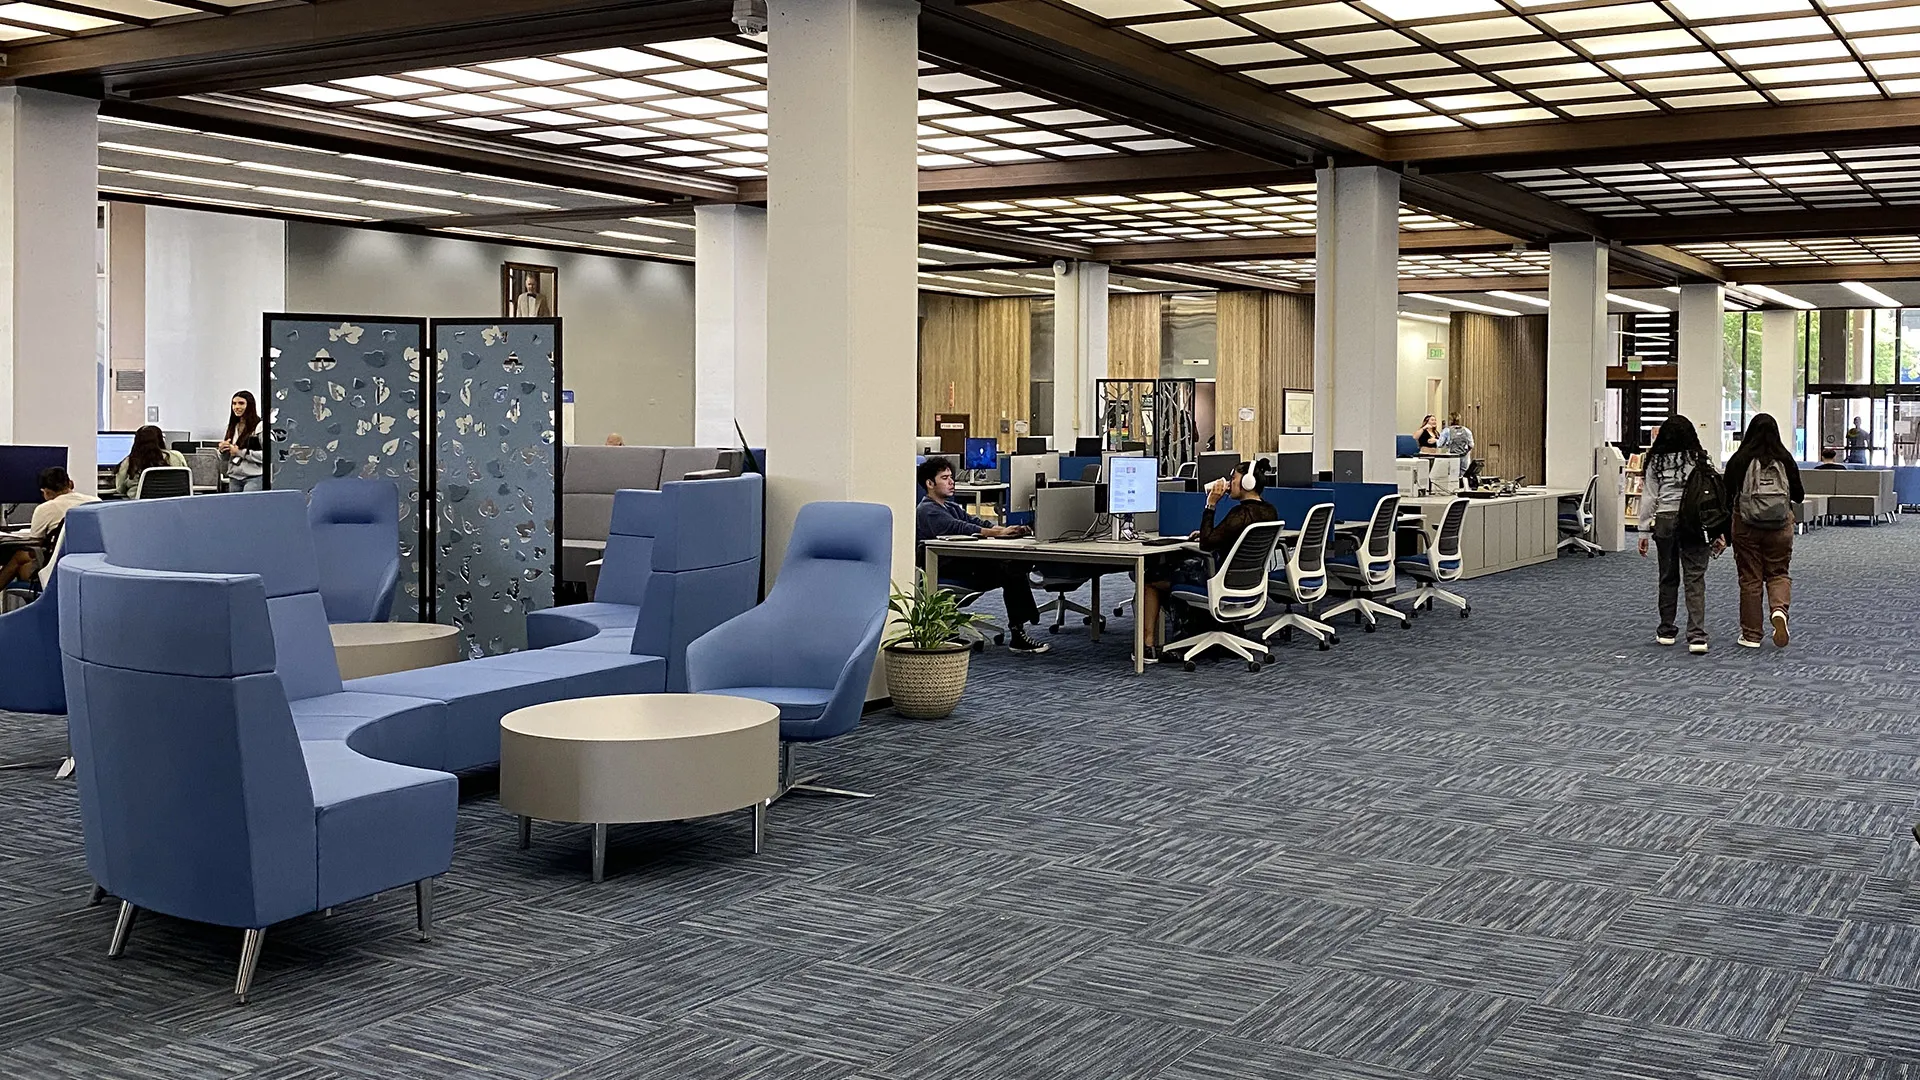 The newly remodeled 1st Floor Commons at the John M. Pfau Library.